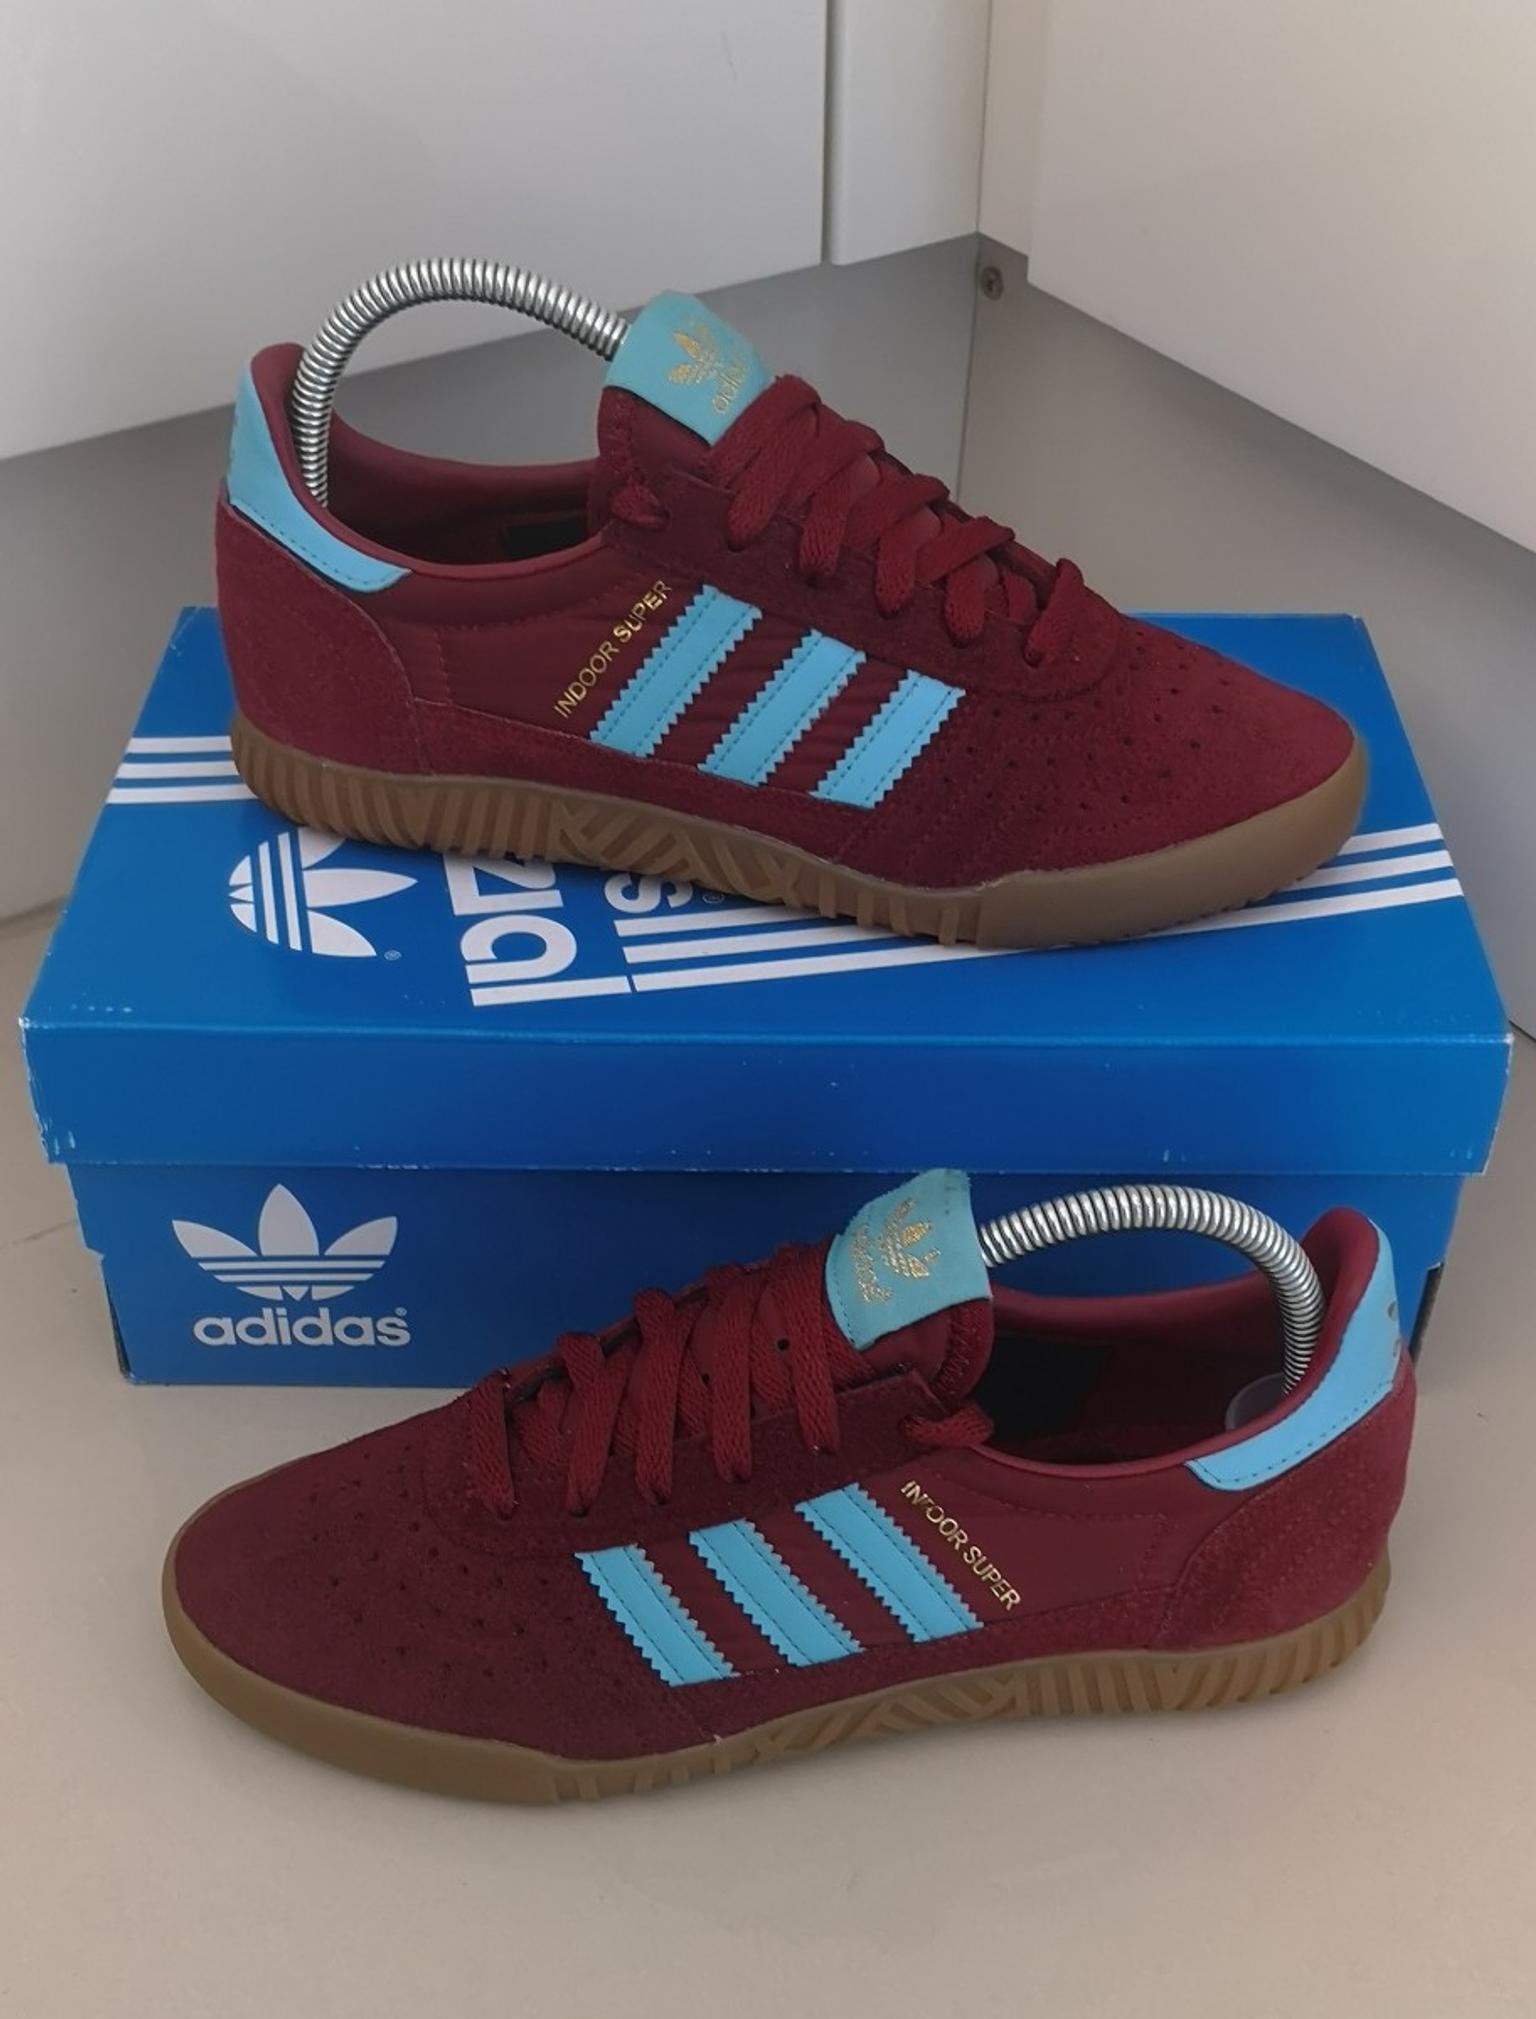 Adidas Indoor Super Claret and Blue UK 6 in Bolsover for £40.00 for sale |  Shpock